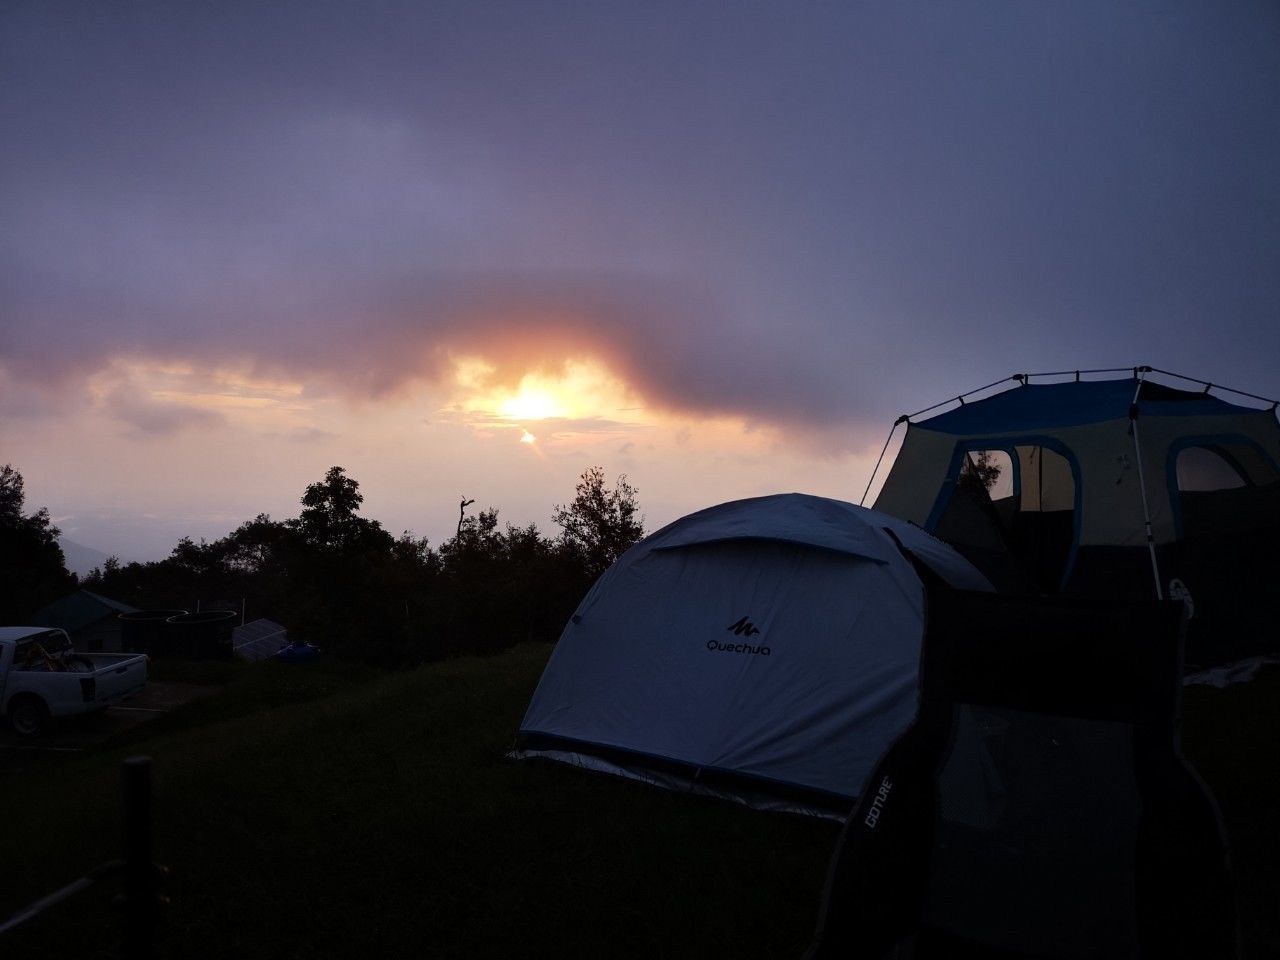 VIEW OF TENT AGAINST CLOUDY SKY